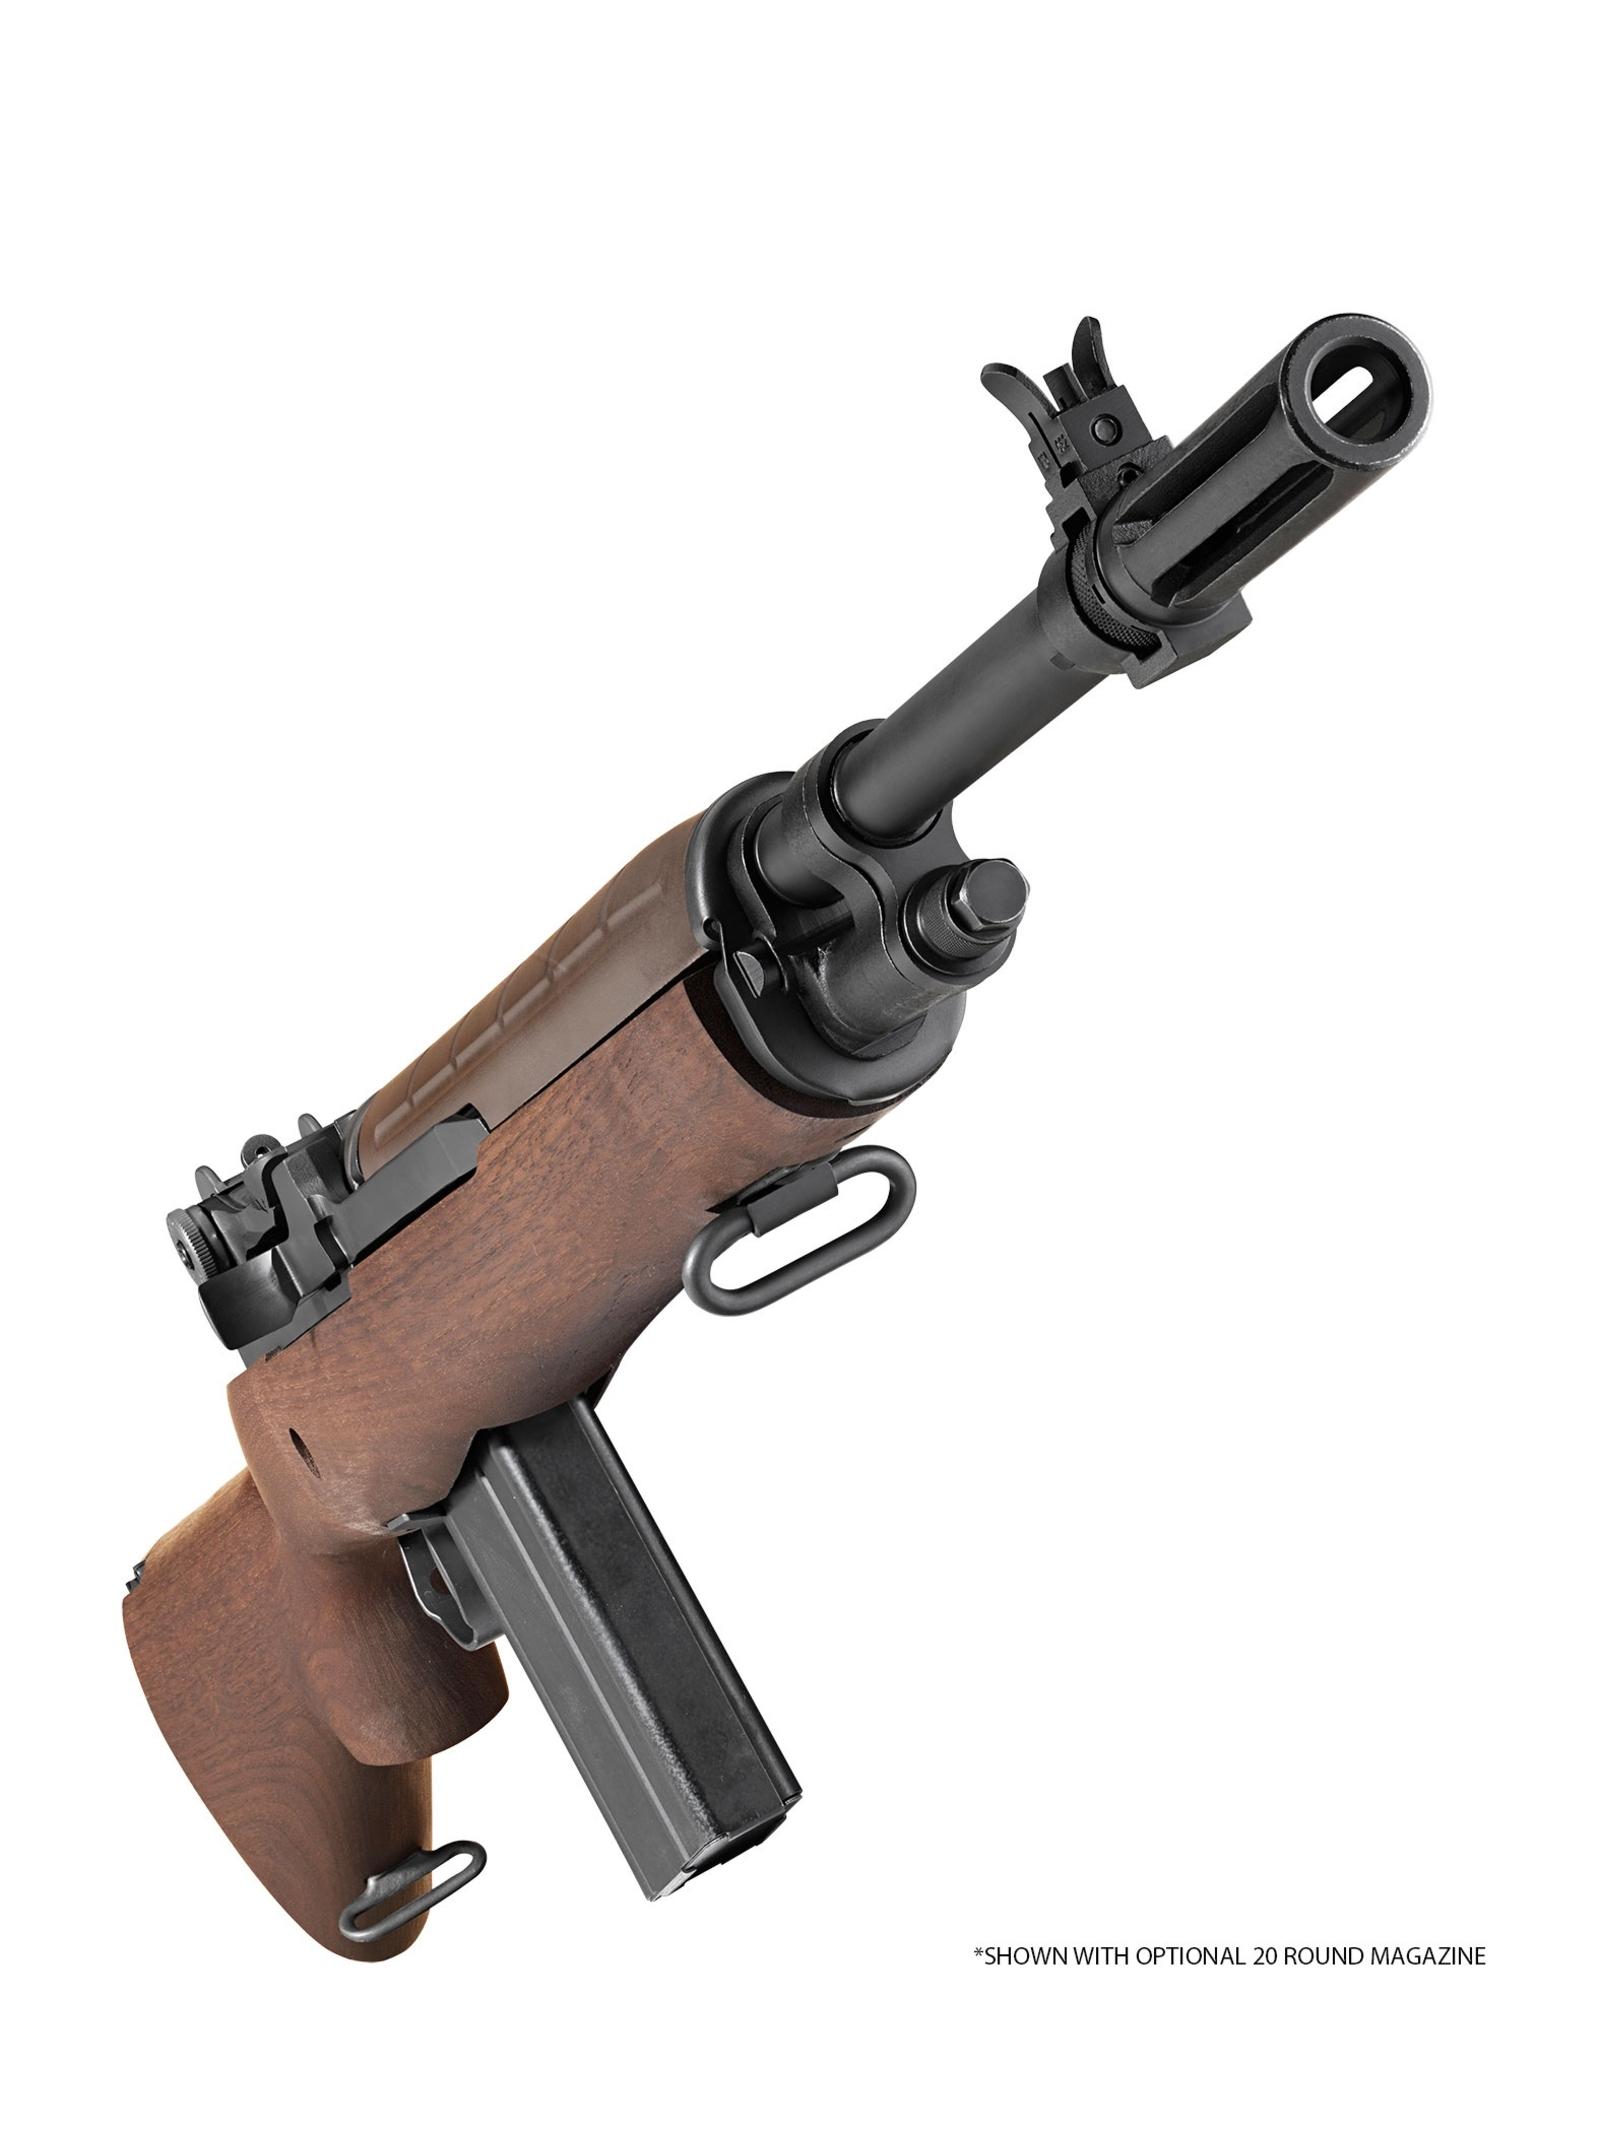  Springfield Armory M1A™ STANDARD ISSUE RIFLE .308 2